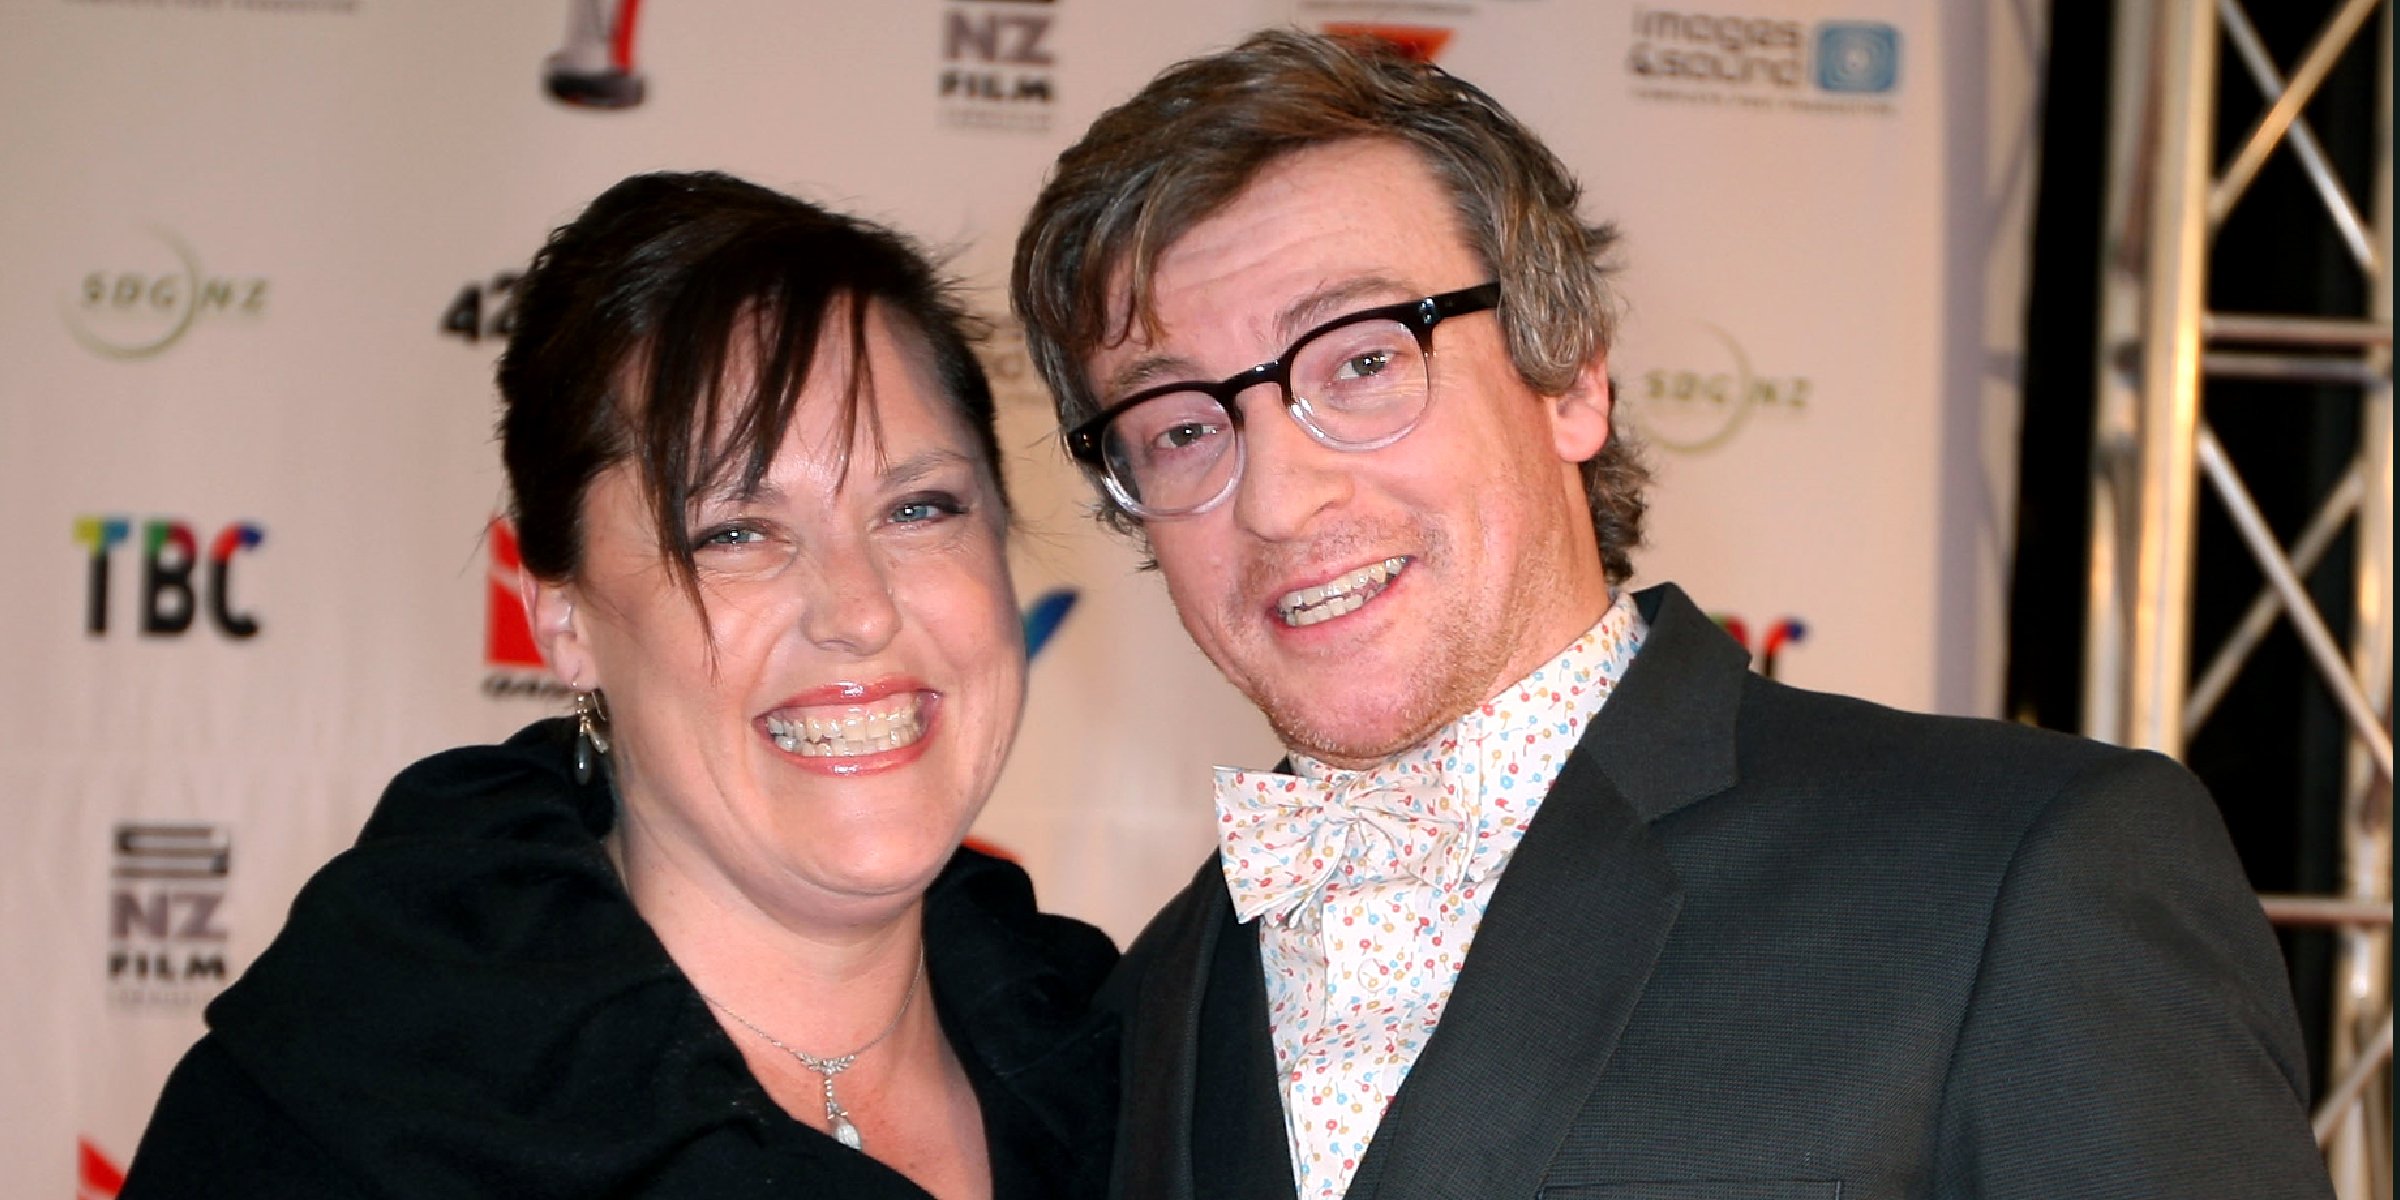 Rhys Darby and Rosie Carnahan | Source: Getty Images